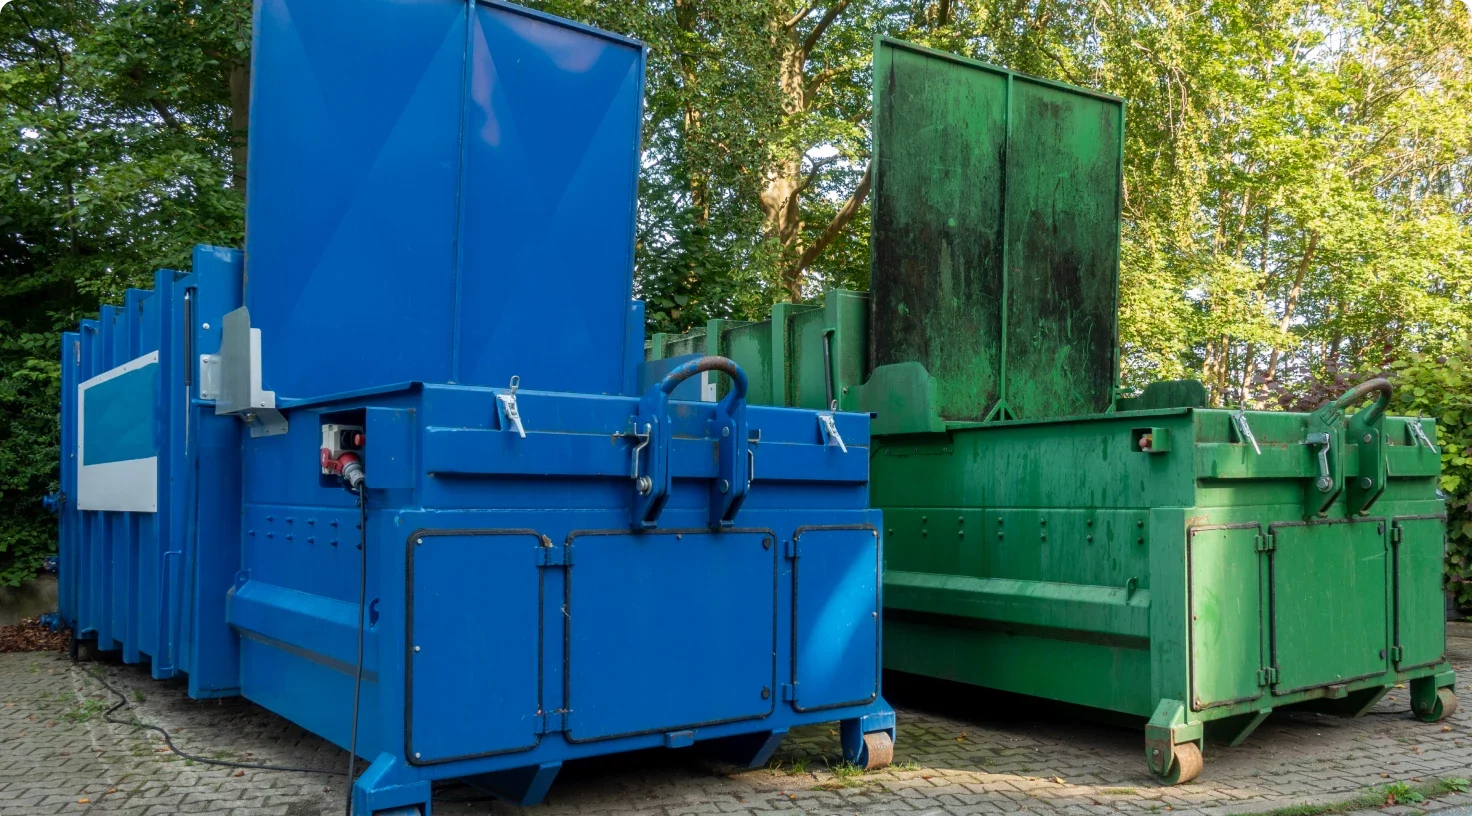 Two Garbage Compactors Aspect Ratio 1472 816